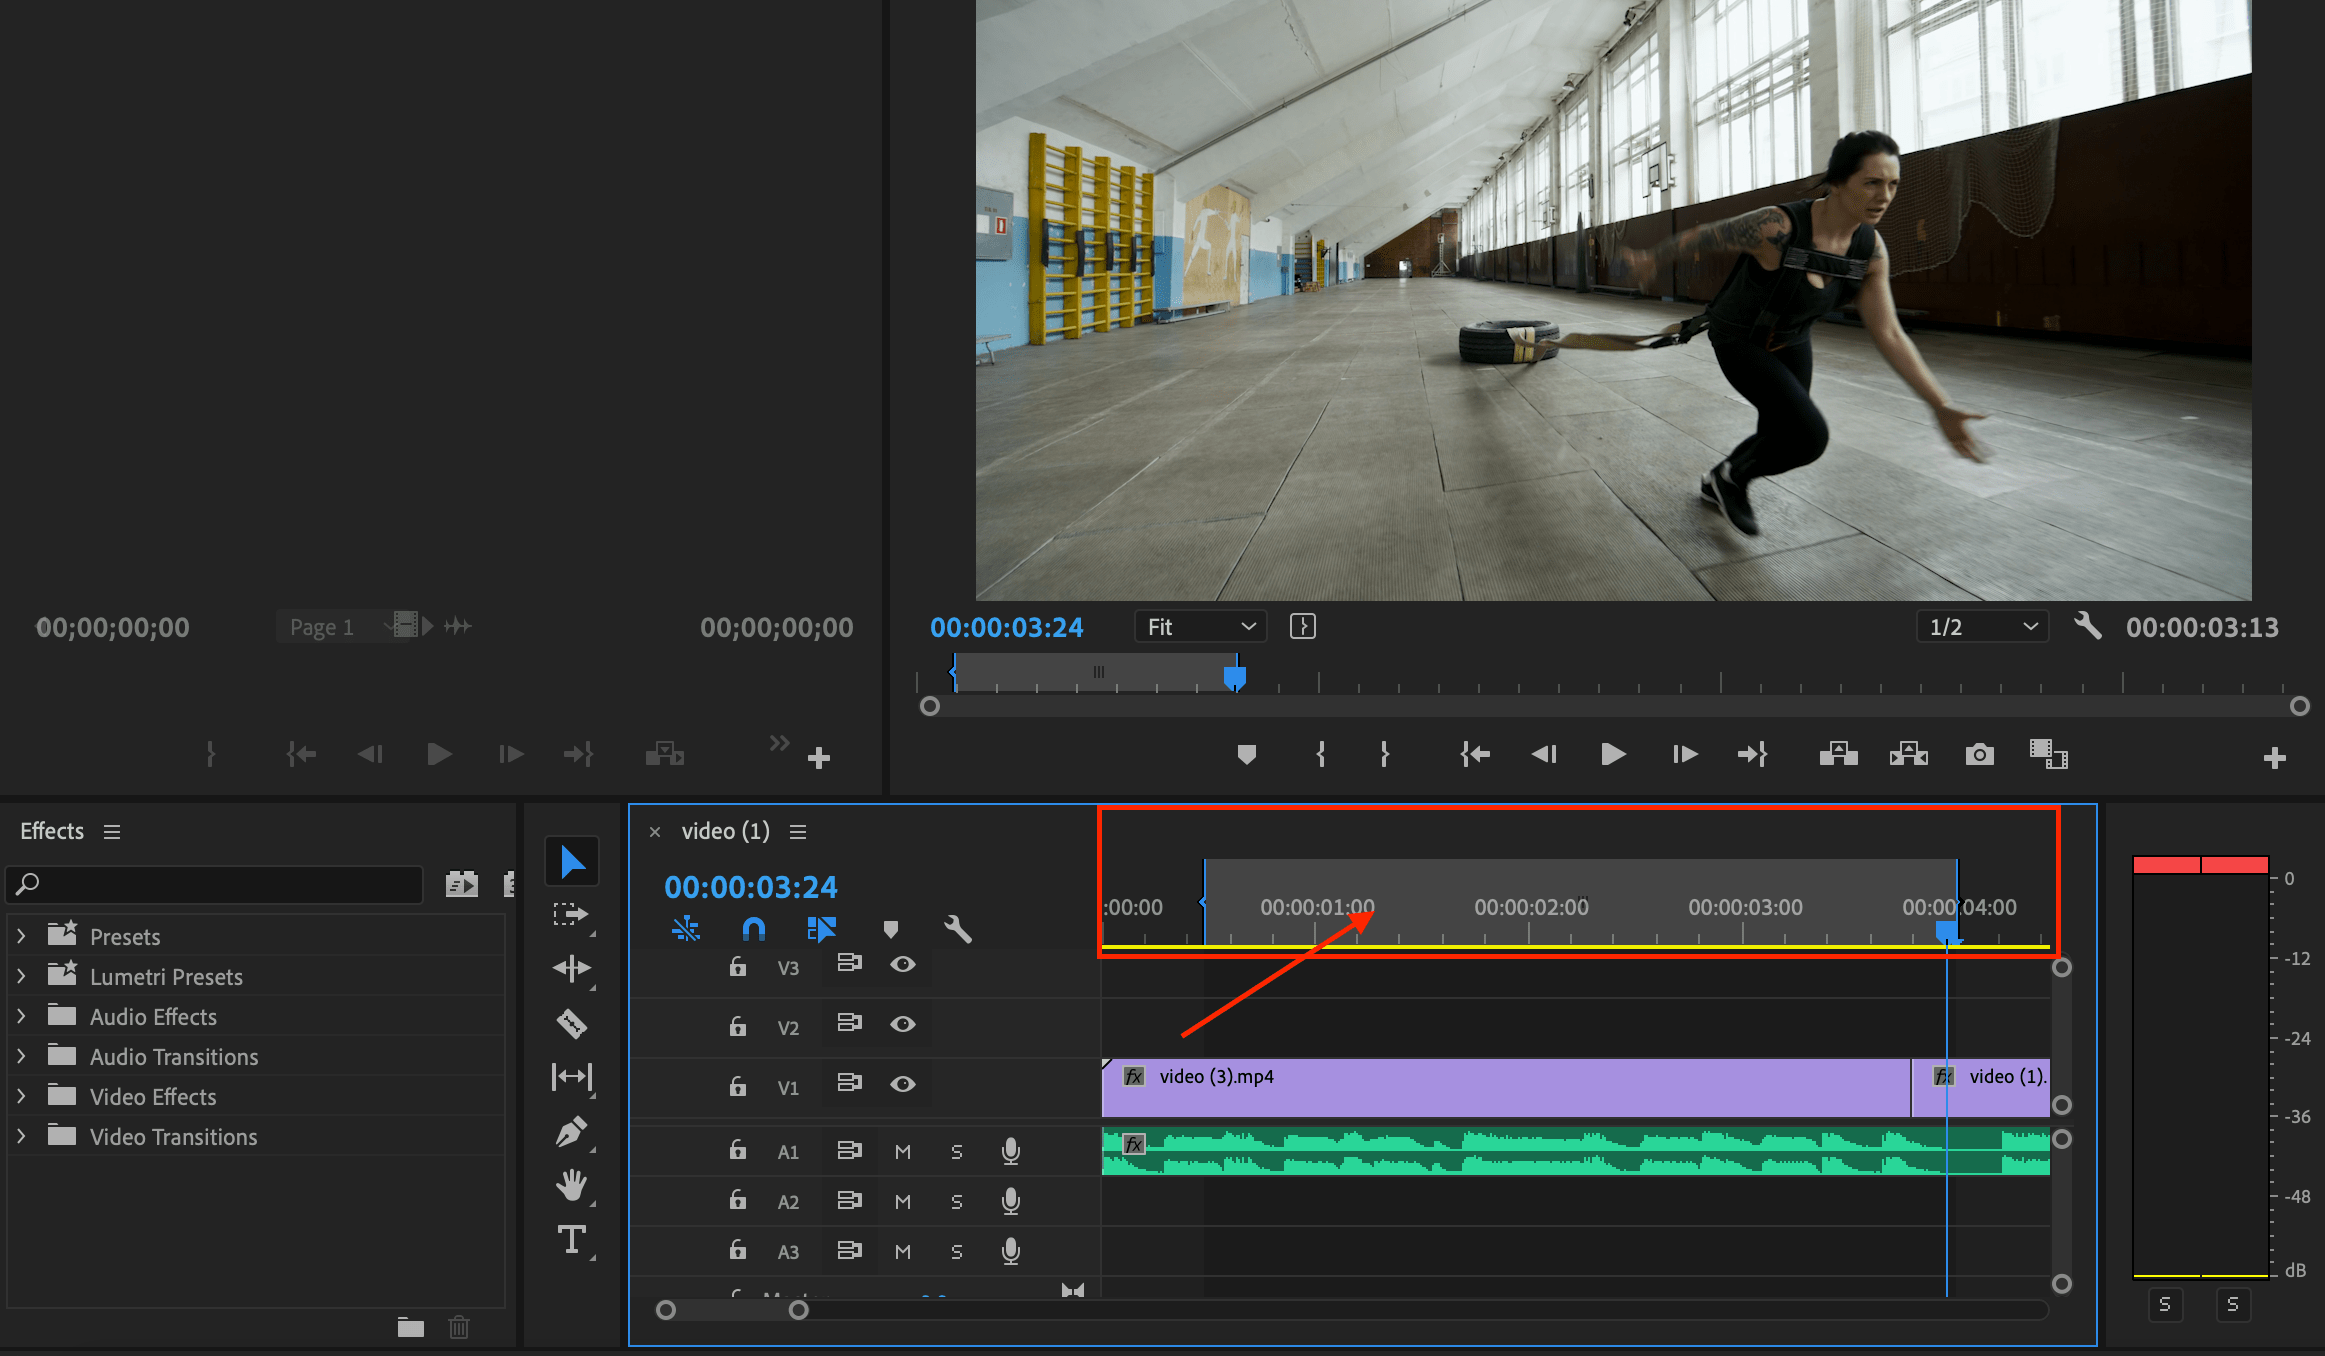 Exporting from Adobe Premiere Pro for YouTube